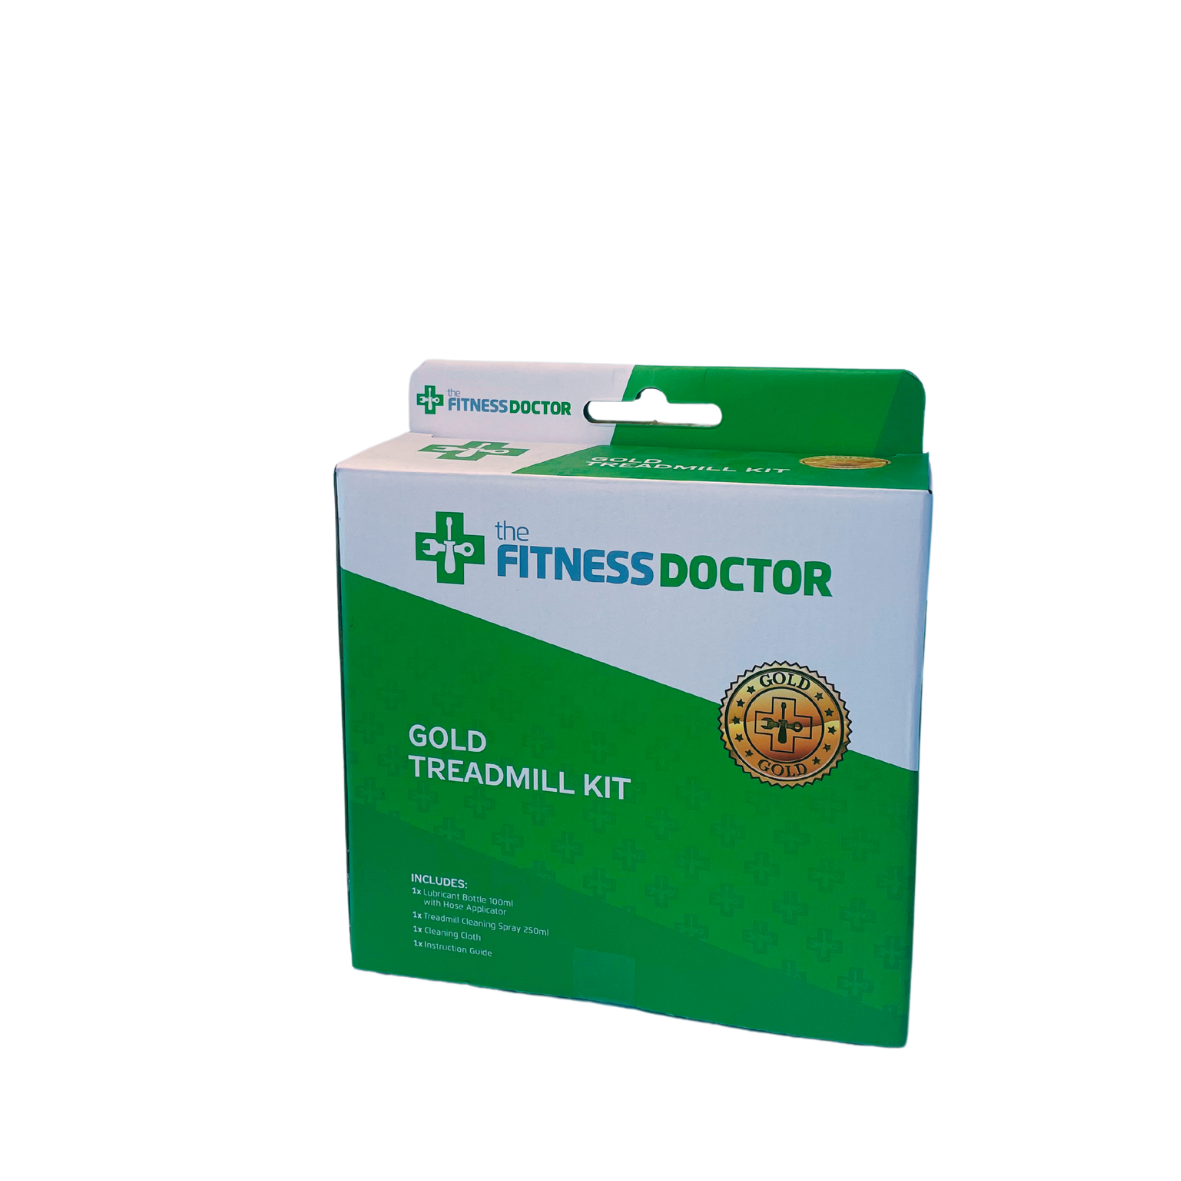 The Fitness Doctor Gold Treadmill Kit